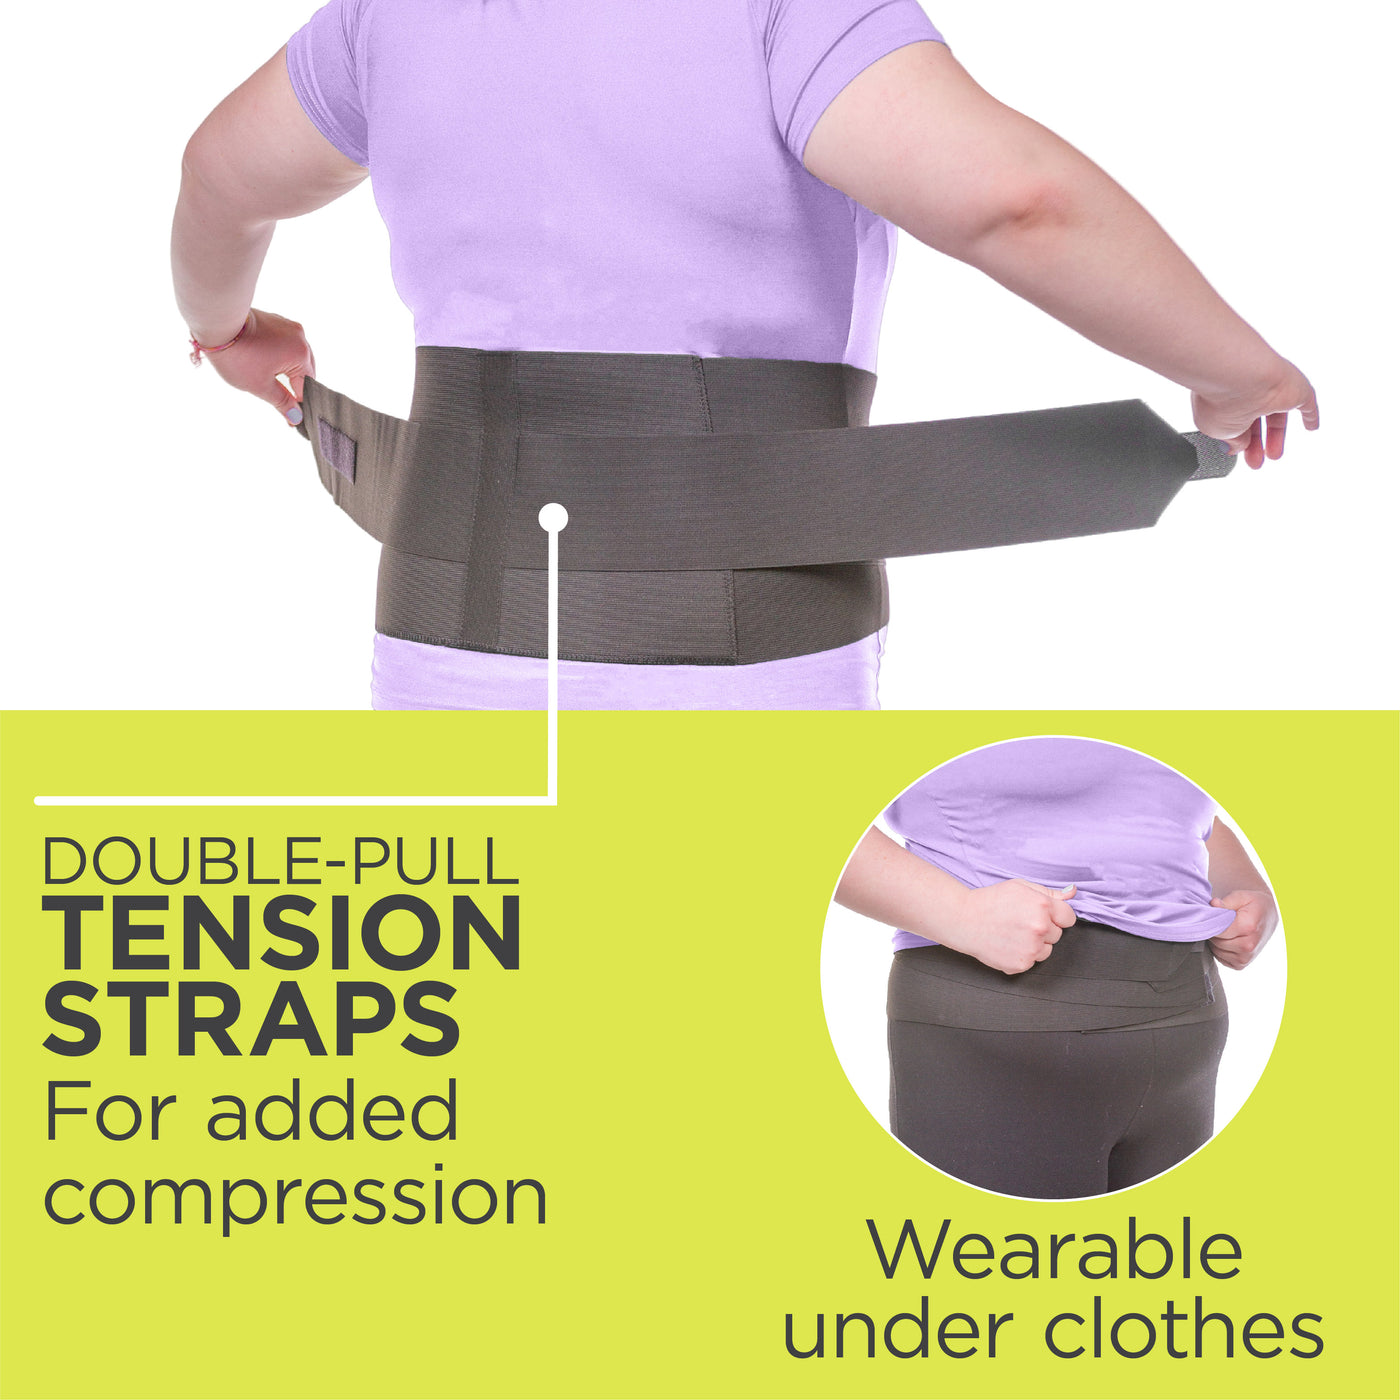 double-pull tension straps help the neoprene back brace give extra-strength support. Wear the back support for sleeping under or over clothes